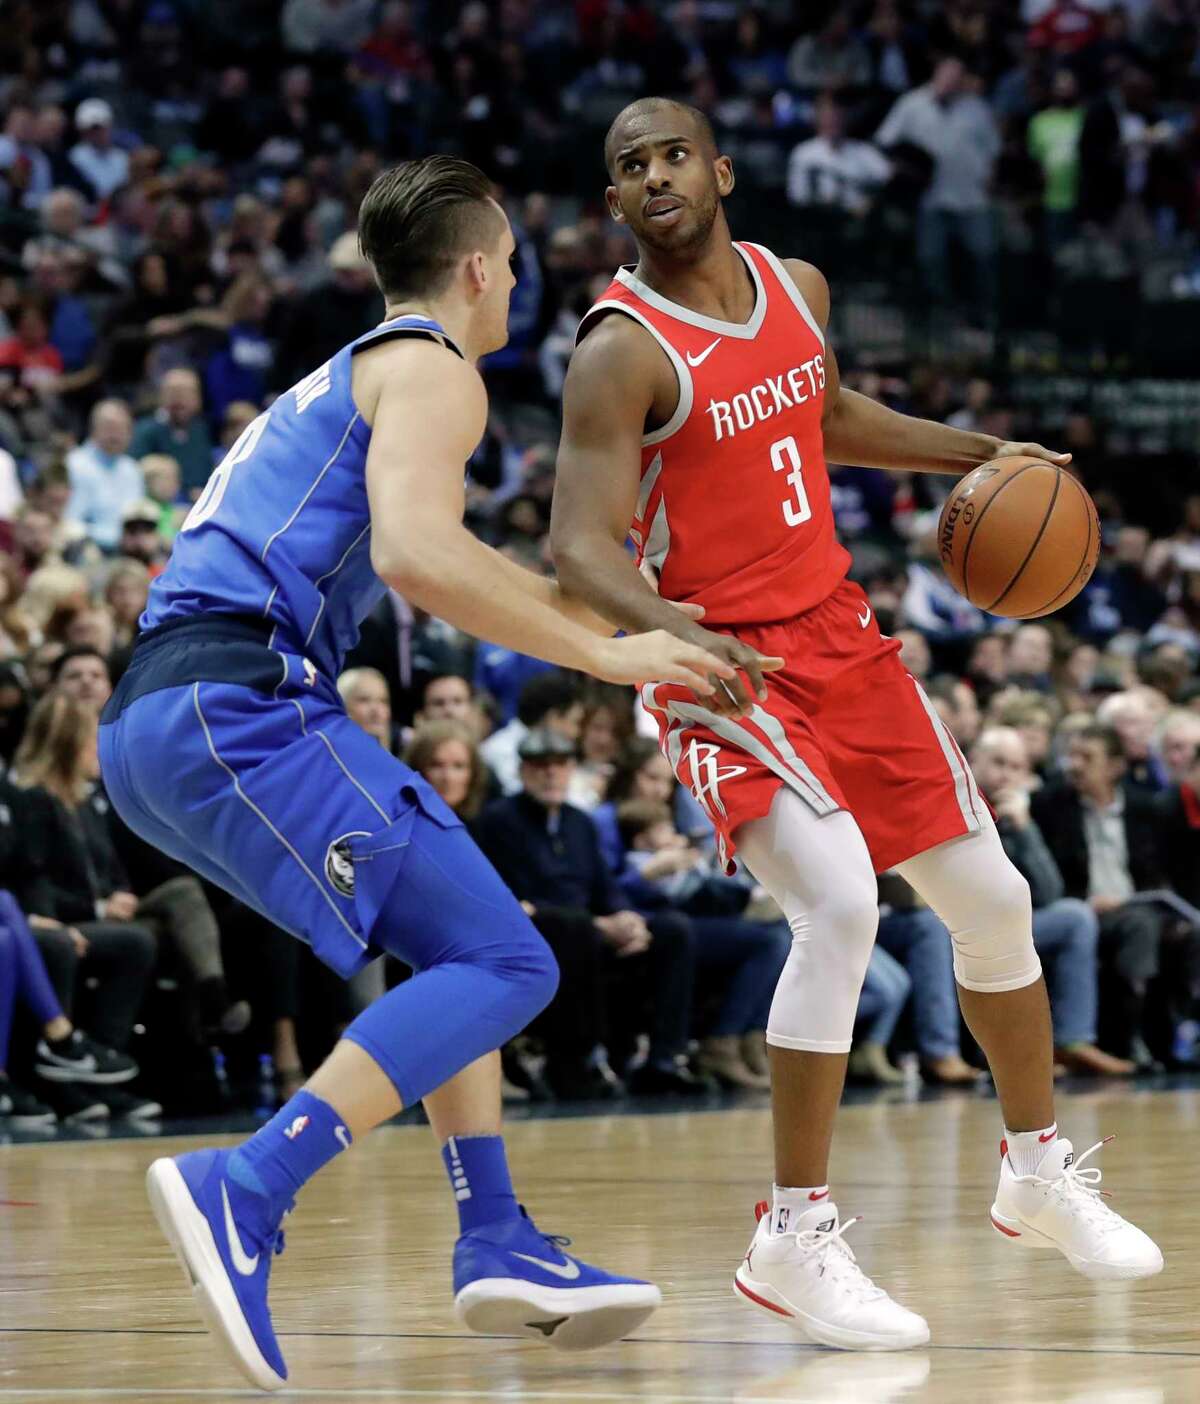 Dallas Mavericks guard Kyle Collinsworth (8) defends as Houston Rockets guard Chris Paul (3) handles the ball in the first half of an NBA basketball game Wednesday, Jan. 24, 2018, in Dallas. (AP Photo/Tony Gutierrez)